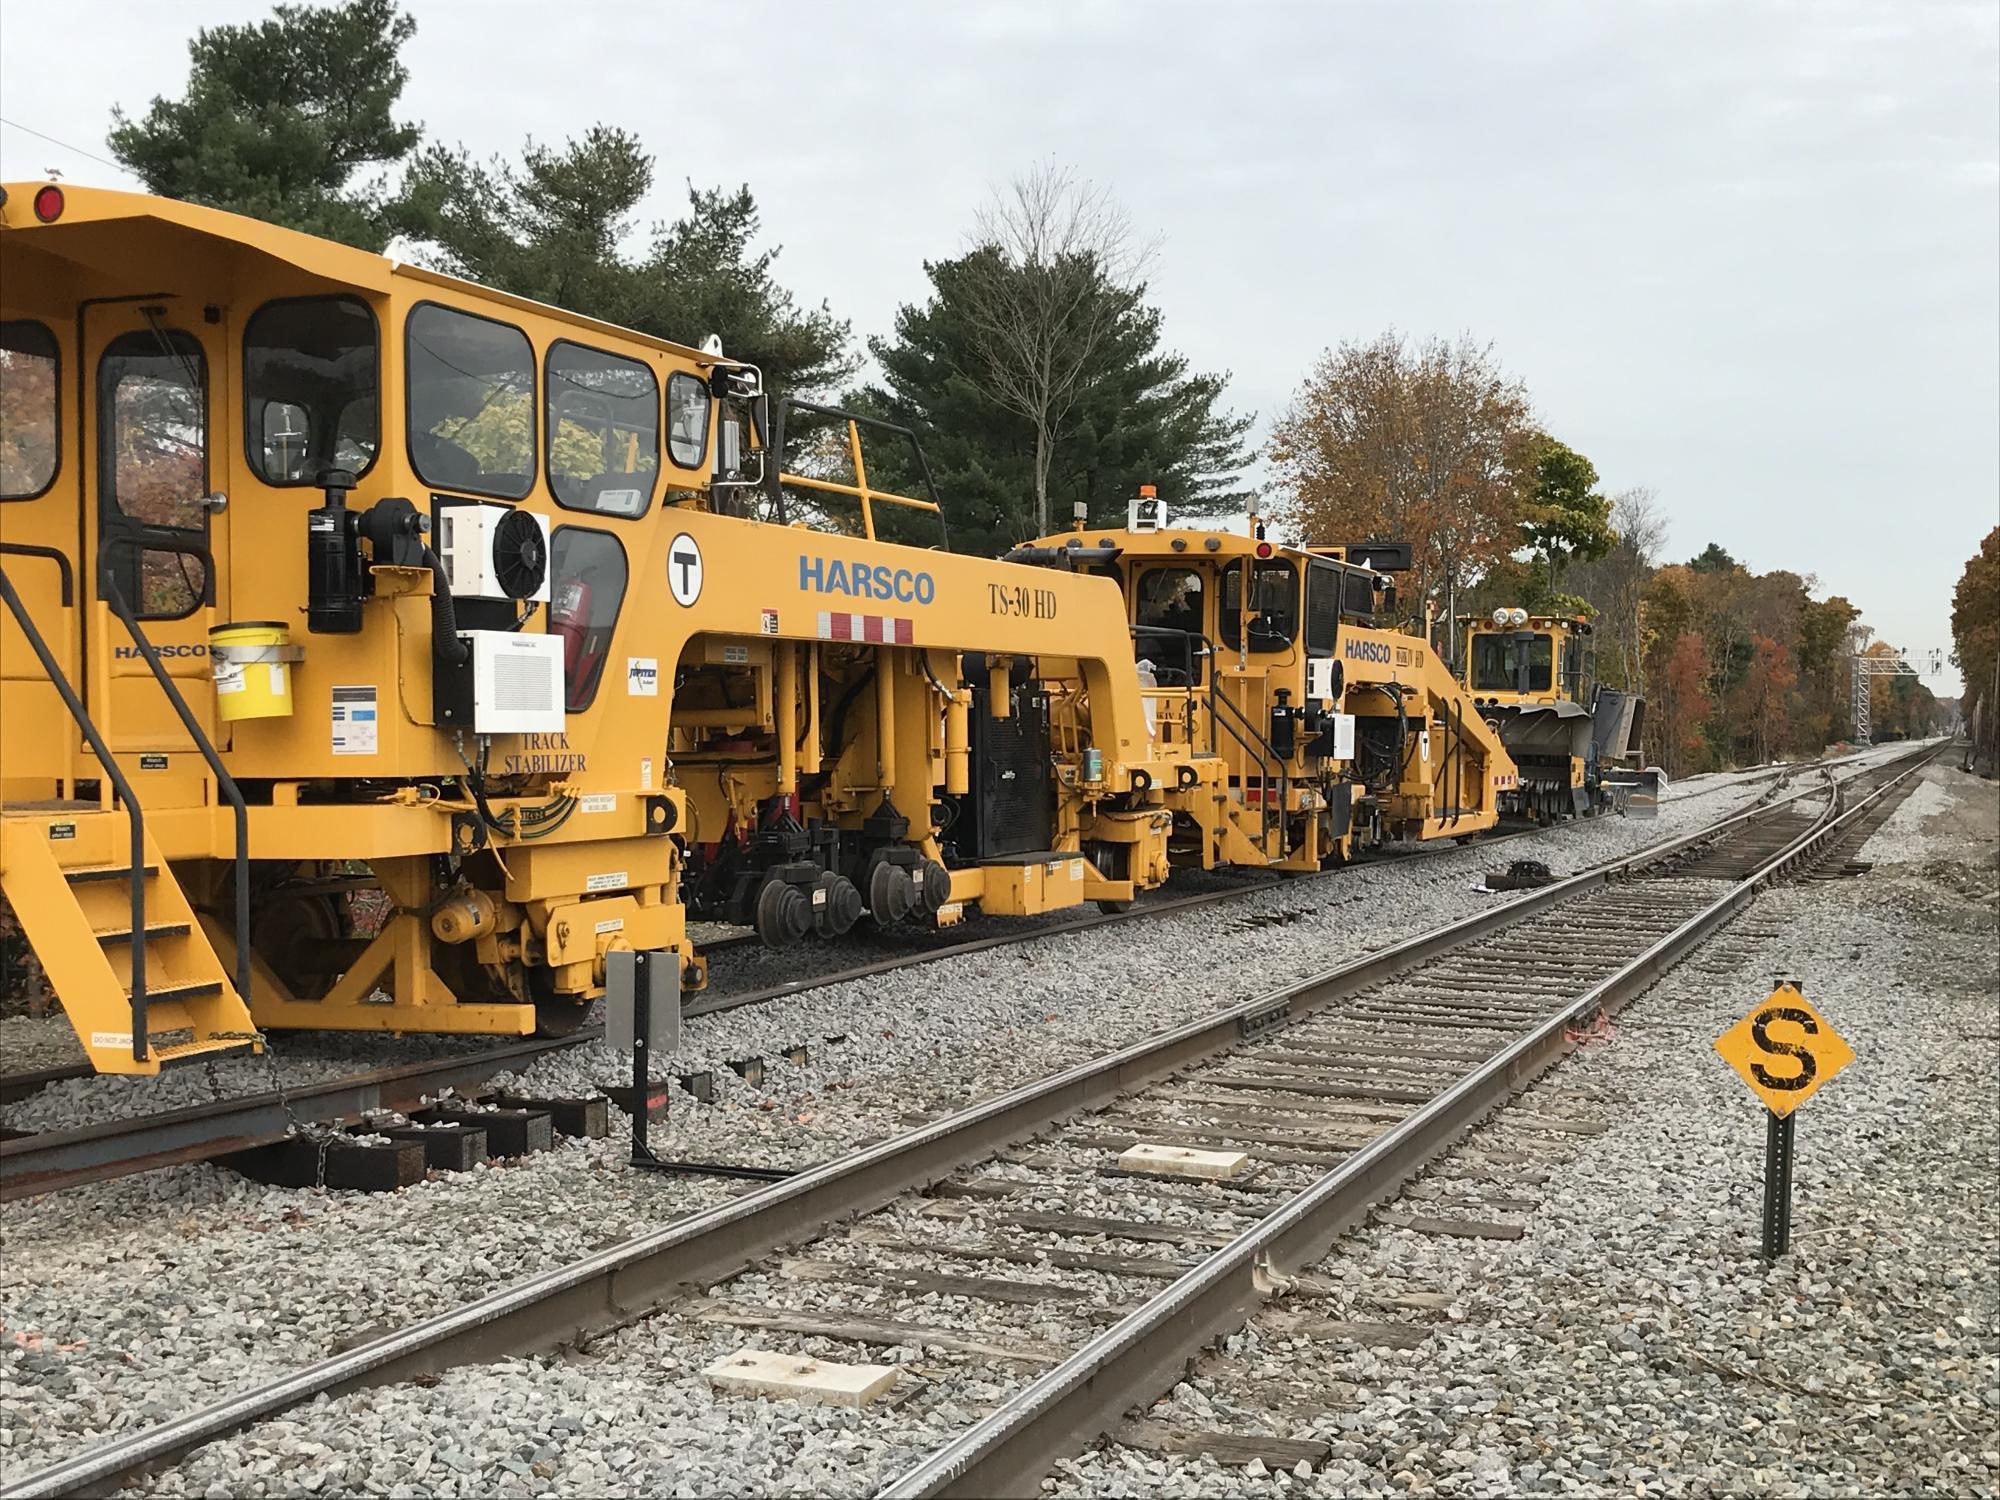 Track surfacing equipment will tamp down the stone ballast and spread it evenly around the tracks